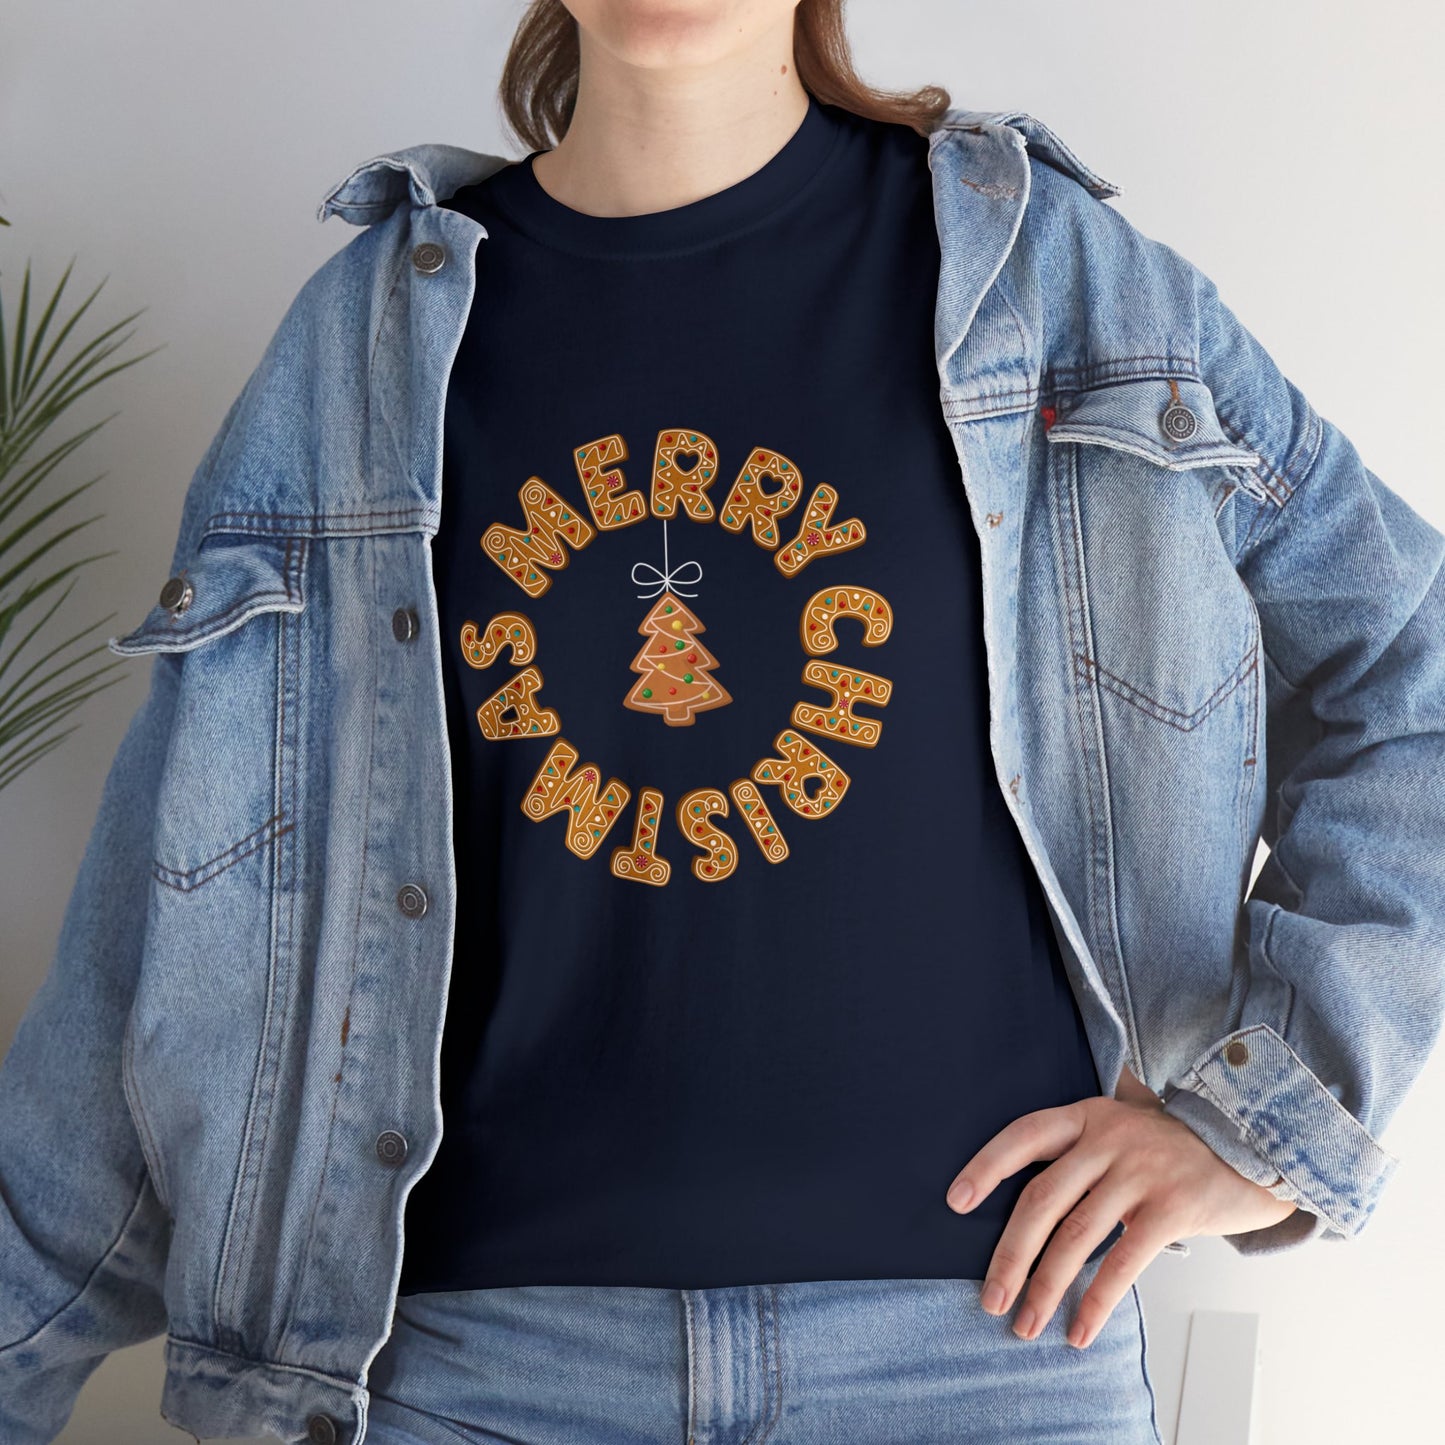 Holiday, Christmas. A woman is wearing a Christmas t-shirt with a wreath made out of gingerbread cookies and spells out Merry Christmas. A Christmas tree cookie dangles in the middle of the wreath.